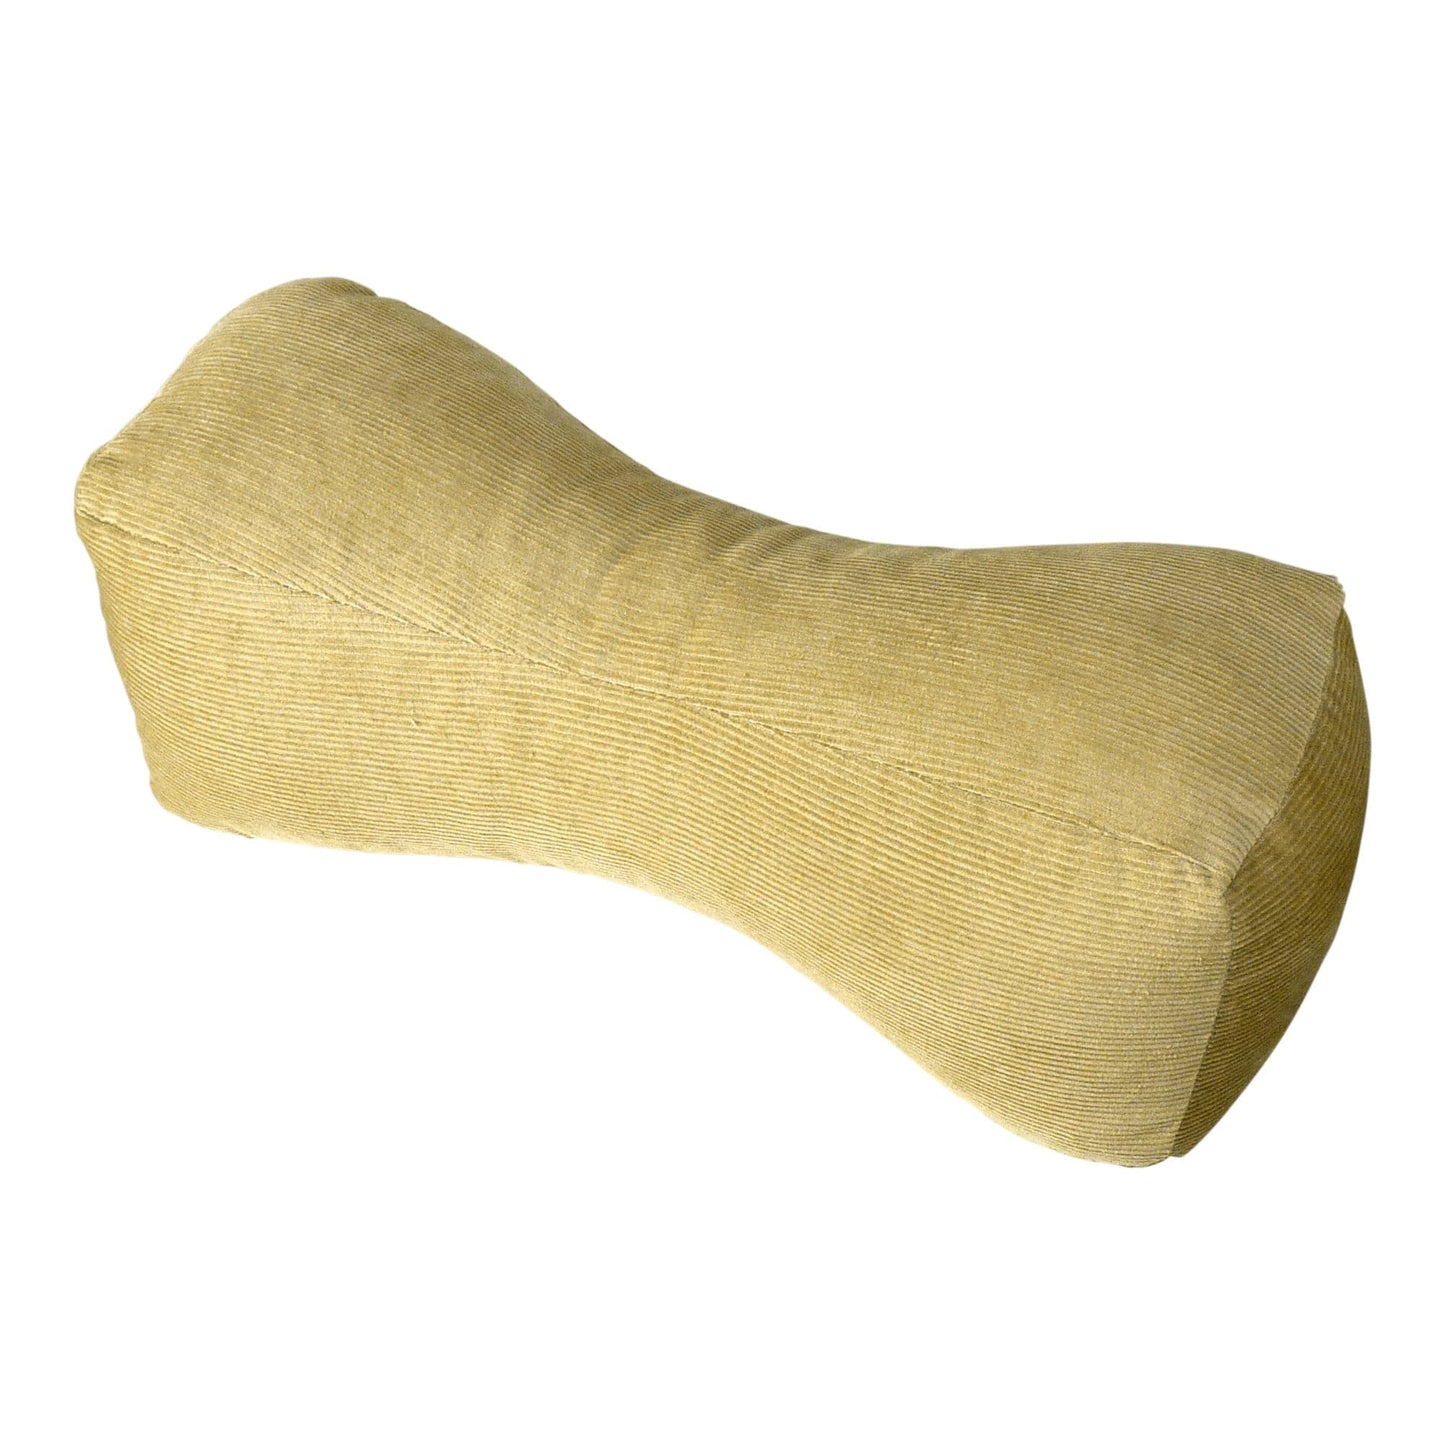 Beige Corduroy Travel Buddy Bone Shaped Neck Support Pillow Solid Color comfort decor